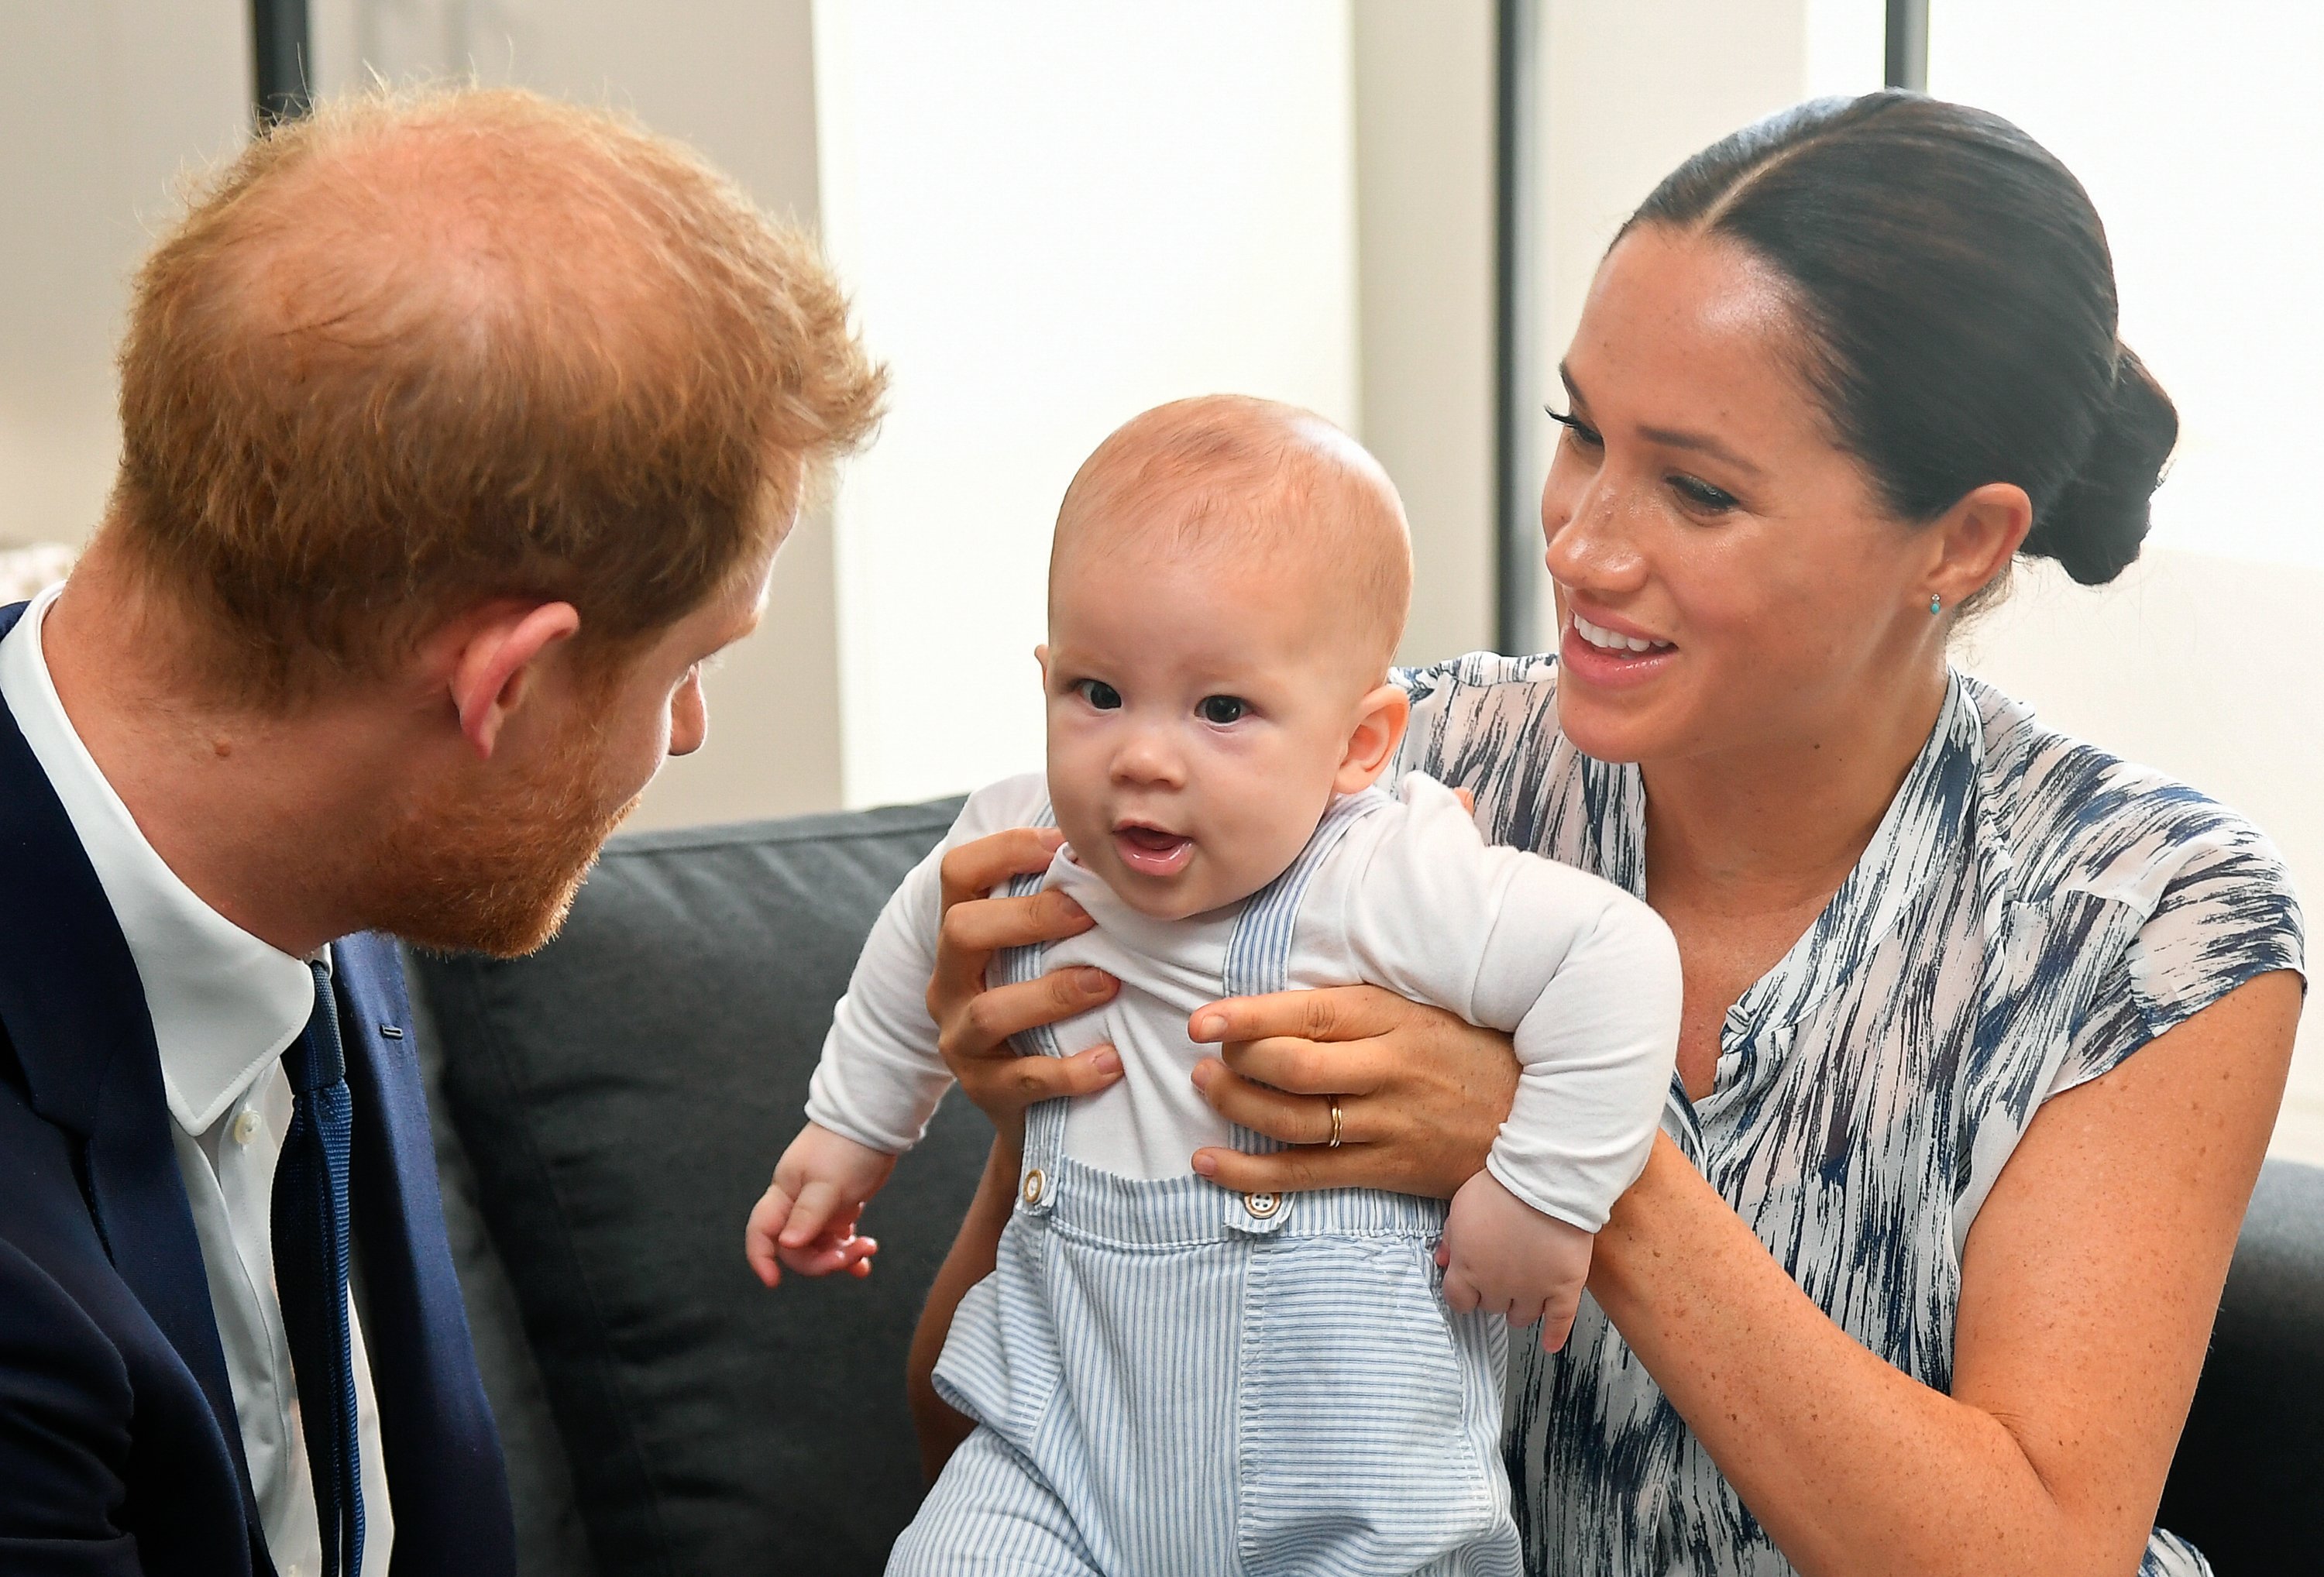 Prince Harry, Meghan Markle and their baby son Archie Mountbatten-Windsor at the Desmond & Leah Tutu Legacy Foundation during their royal tour of South Africa on September 25, 2019 in Cape Town, South Africa. / Source: Getty Images